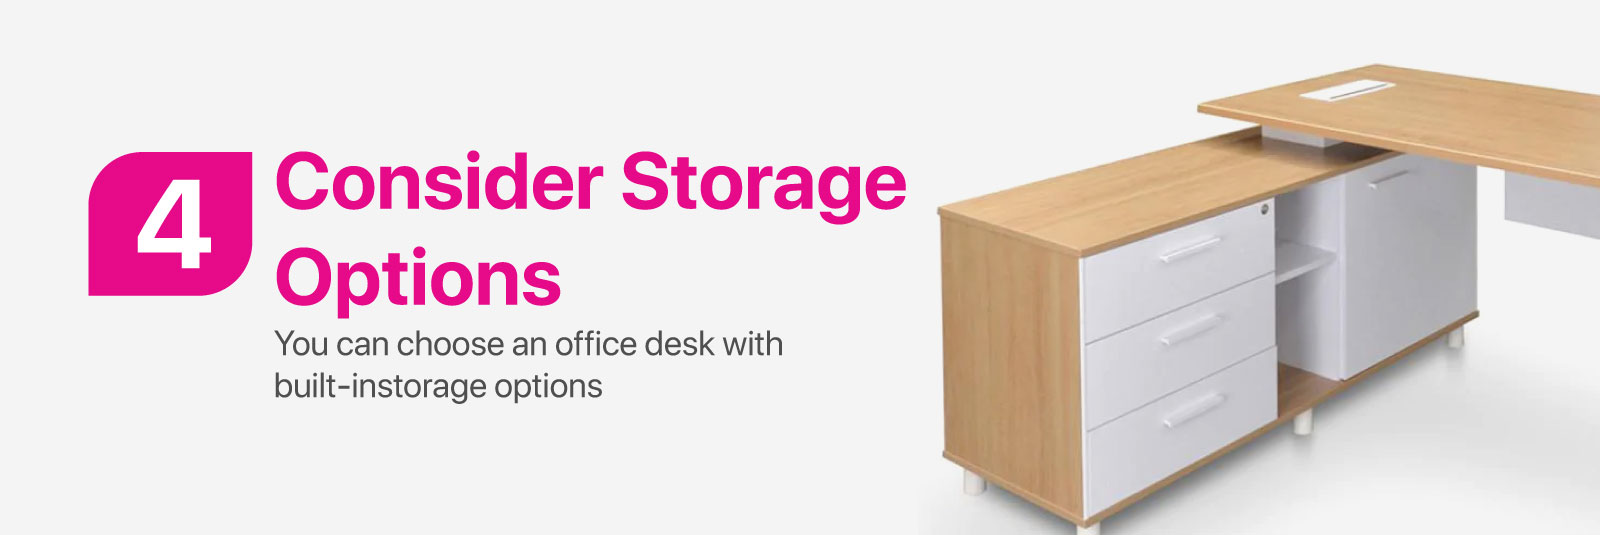 Consider Storage Options - You can choose an office desk with built-in storage options